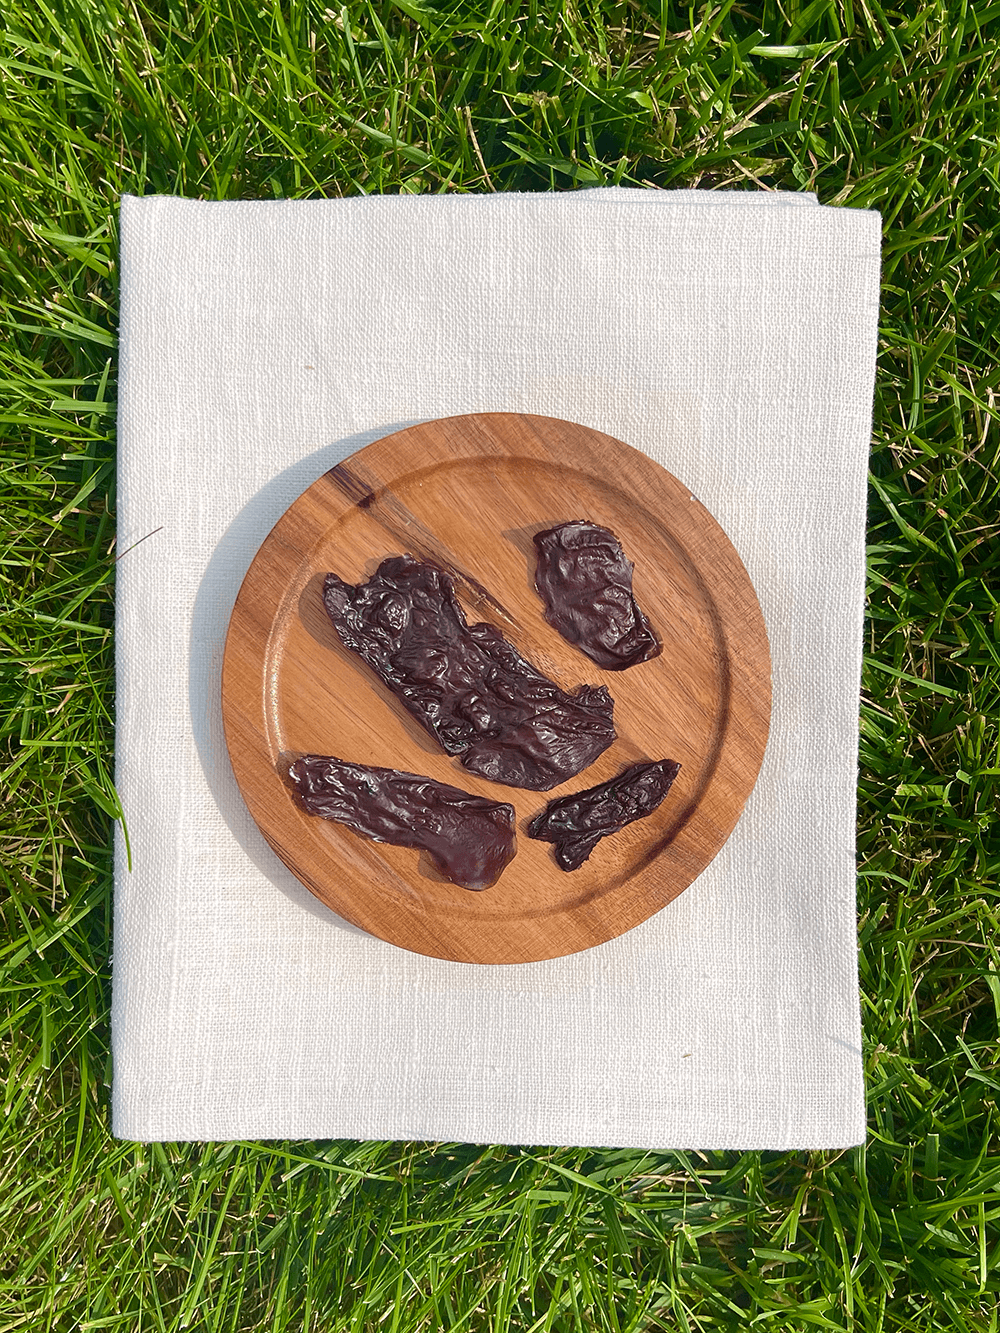 5281-chicken-liver-dehydrated-dog-treat.png